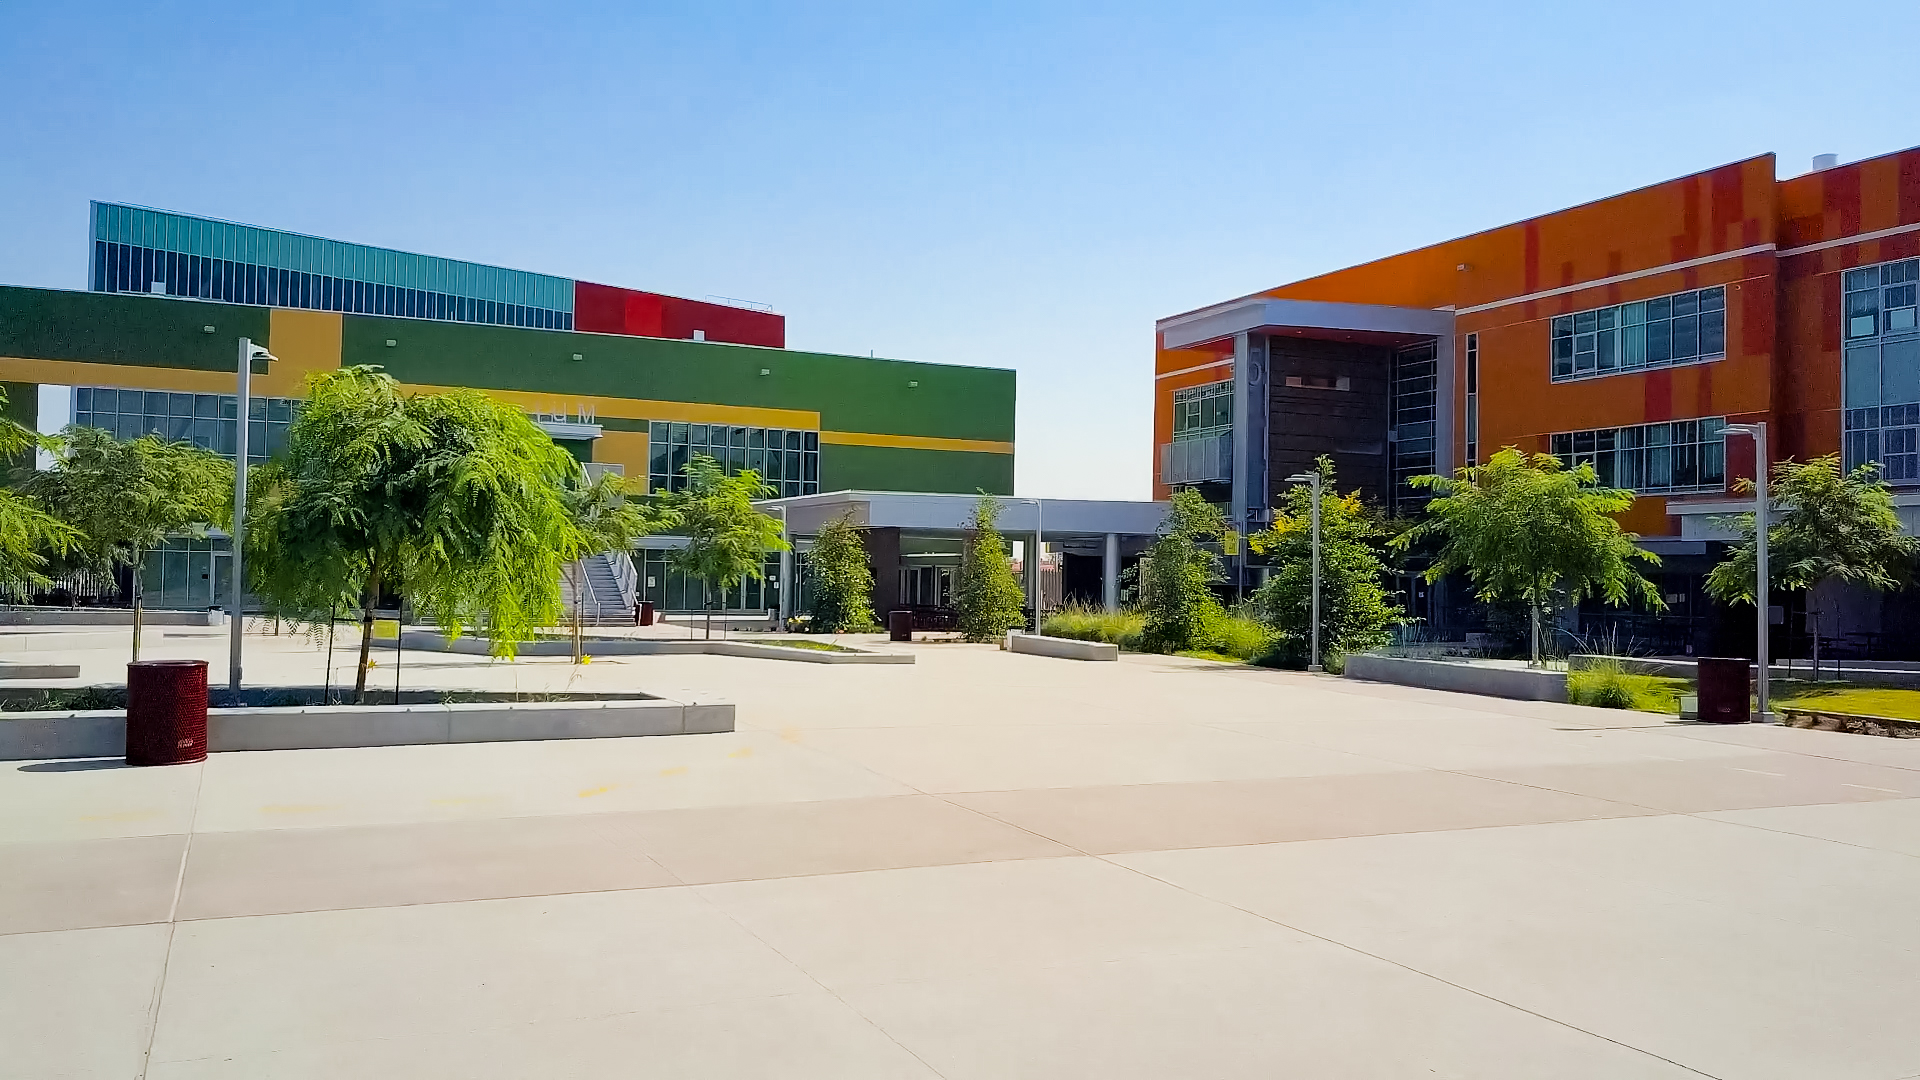 Standing in the center of a school campus surrounded by brightly colored buildings, palm trees, and seating areas